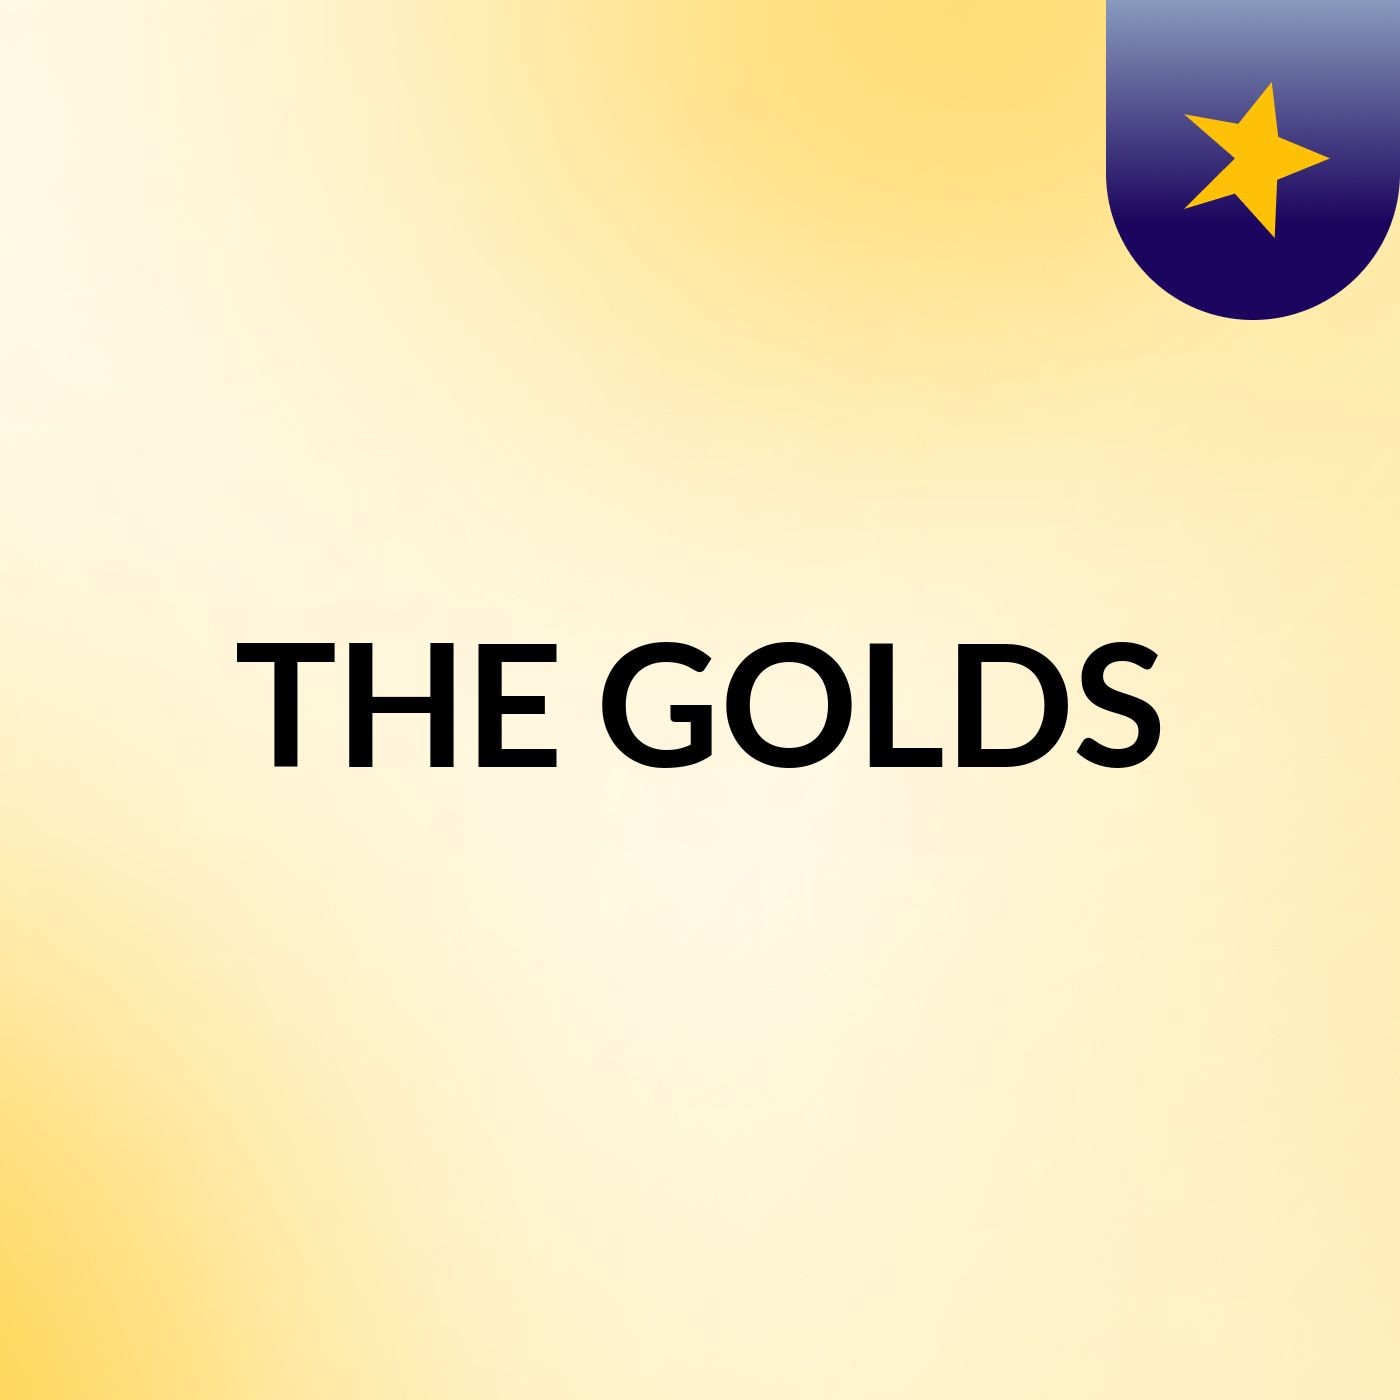 THE GOLDS